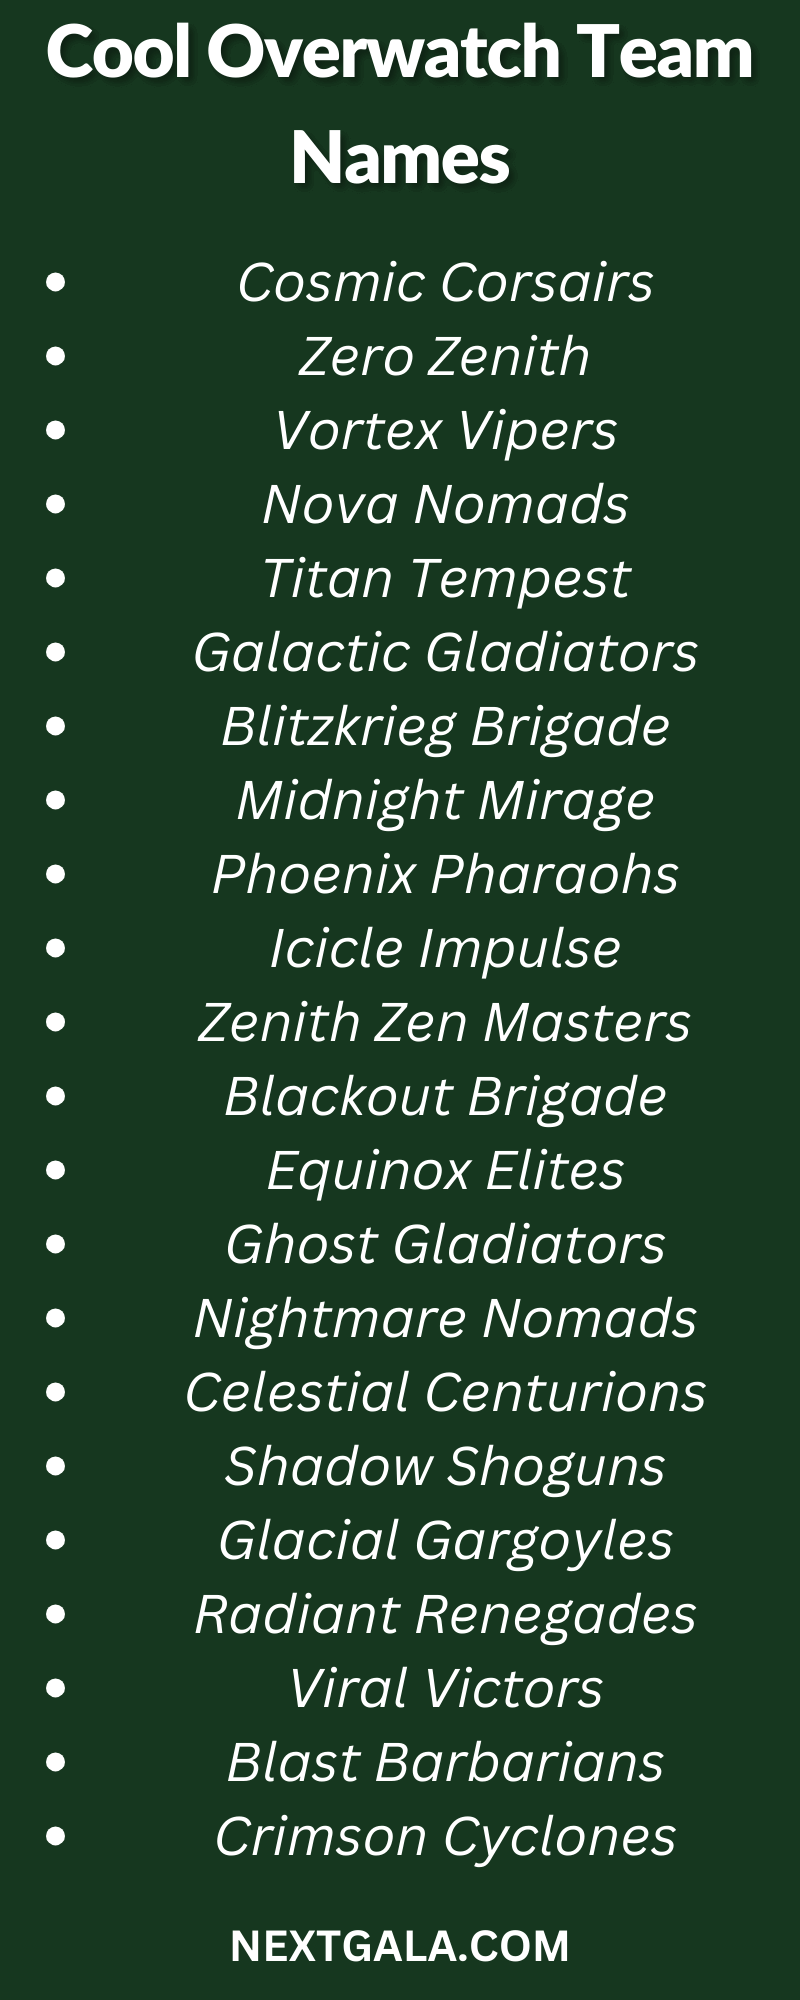 Cool Overwatch Team Names